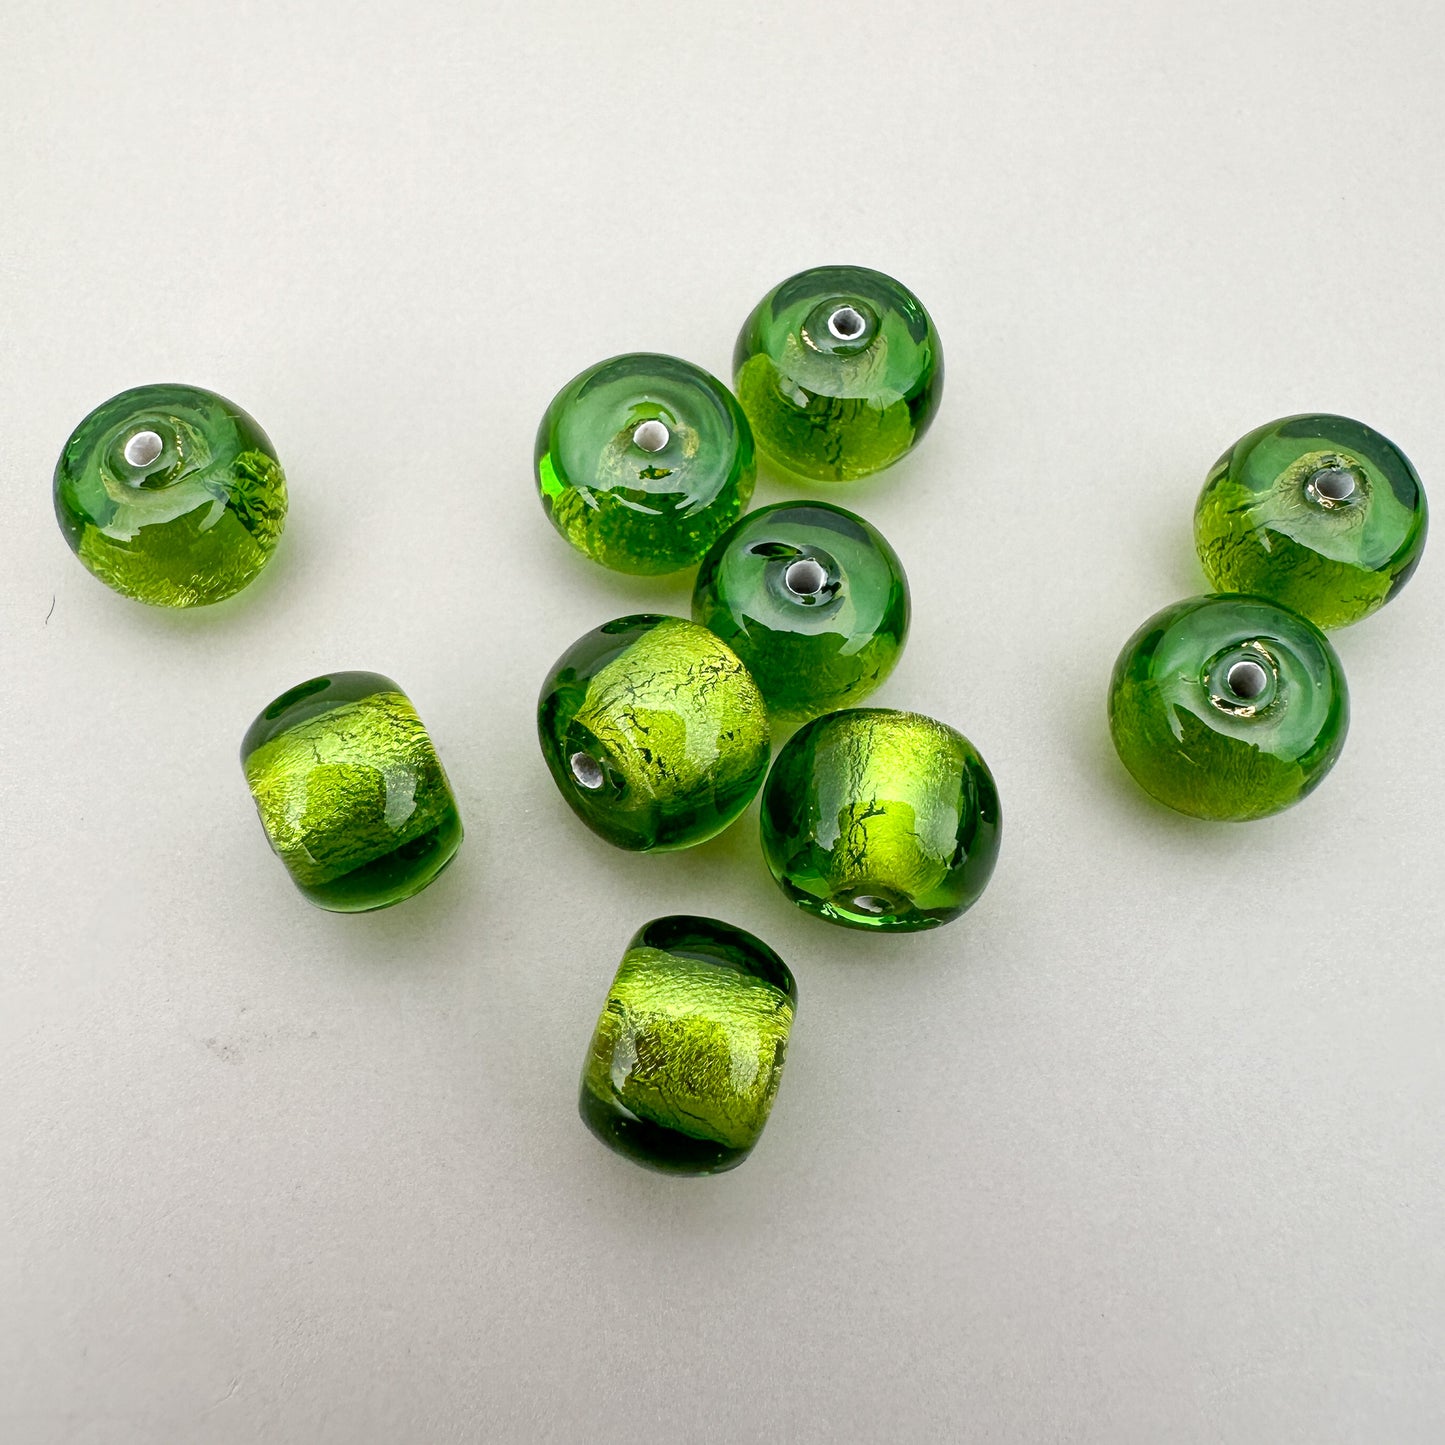 Vintage Handmade Czech Lampwork 9mm Green with Gold Core Glass Bead - 1 pc. (Z589)